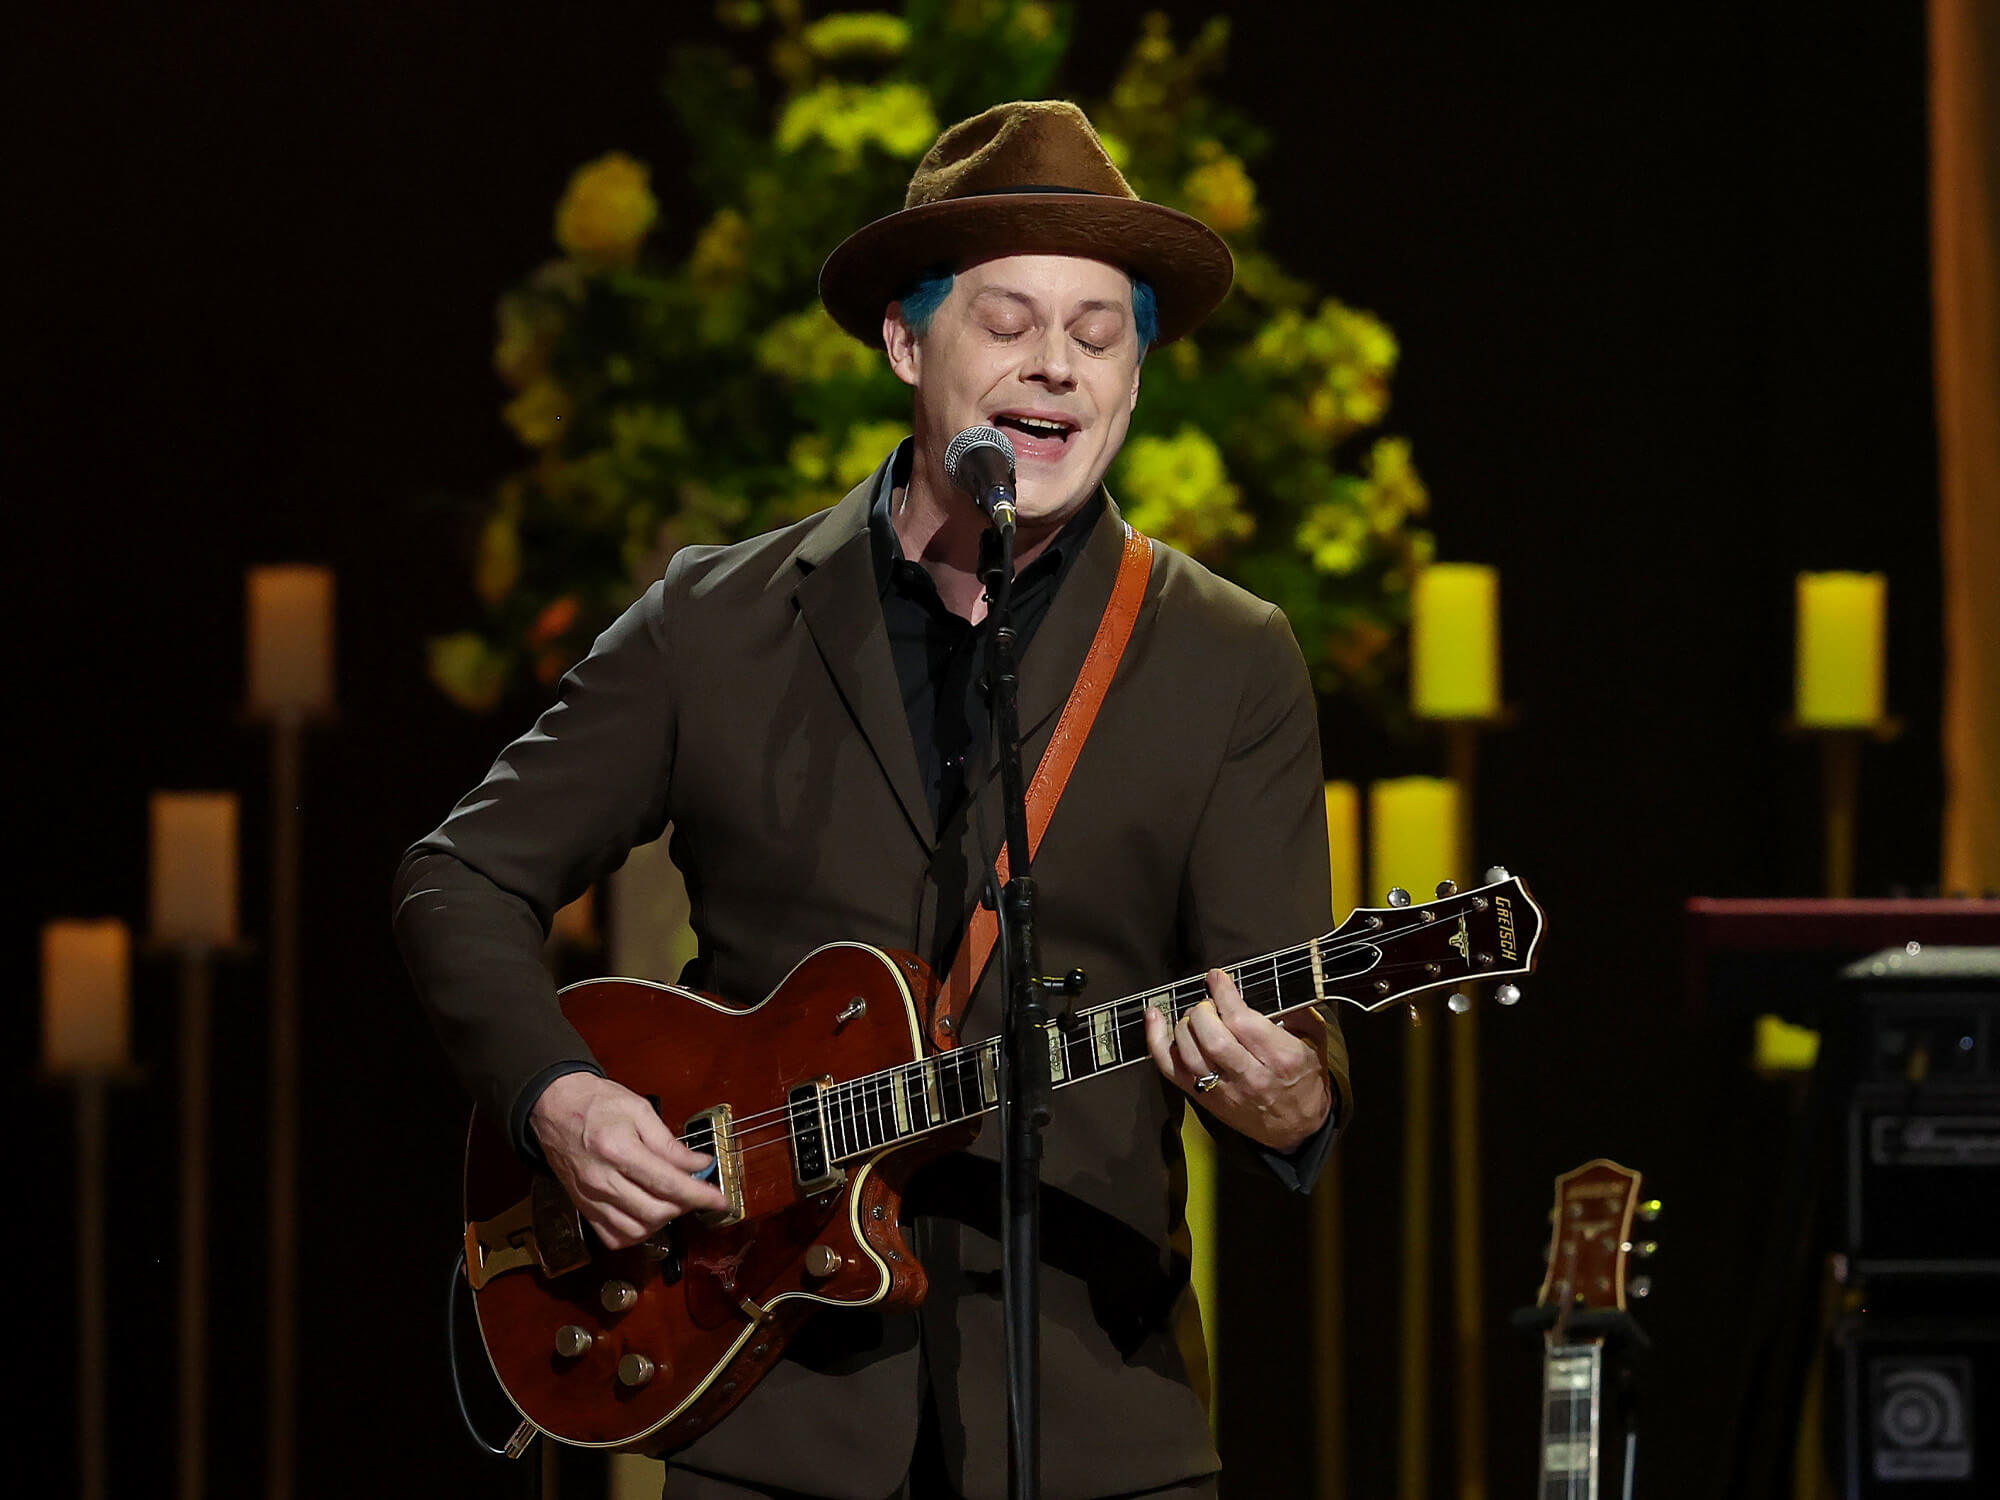 Jack White on stage. He is singing into a mic on a stand and is playing a Gretsch electric guitar. He wears a brown hat and suit jacket. His bright blue hair can be seen just peeping from underneath the hat.